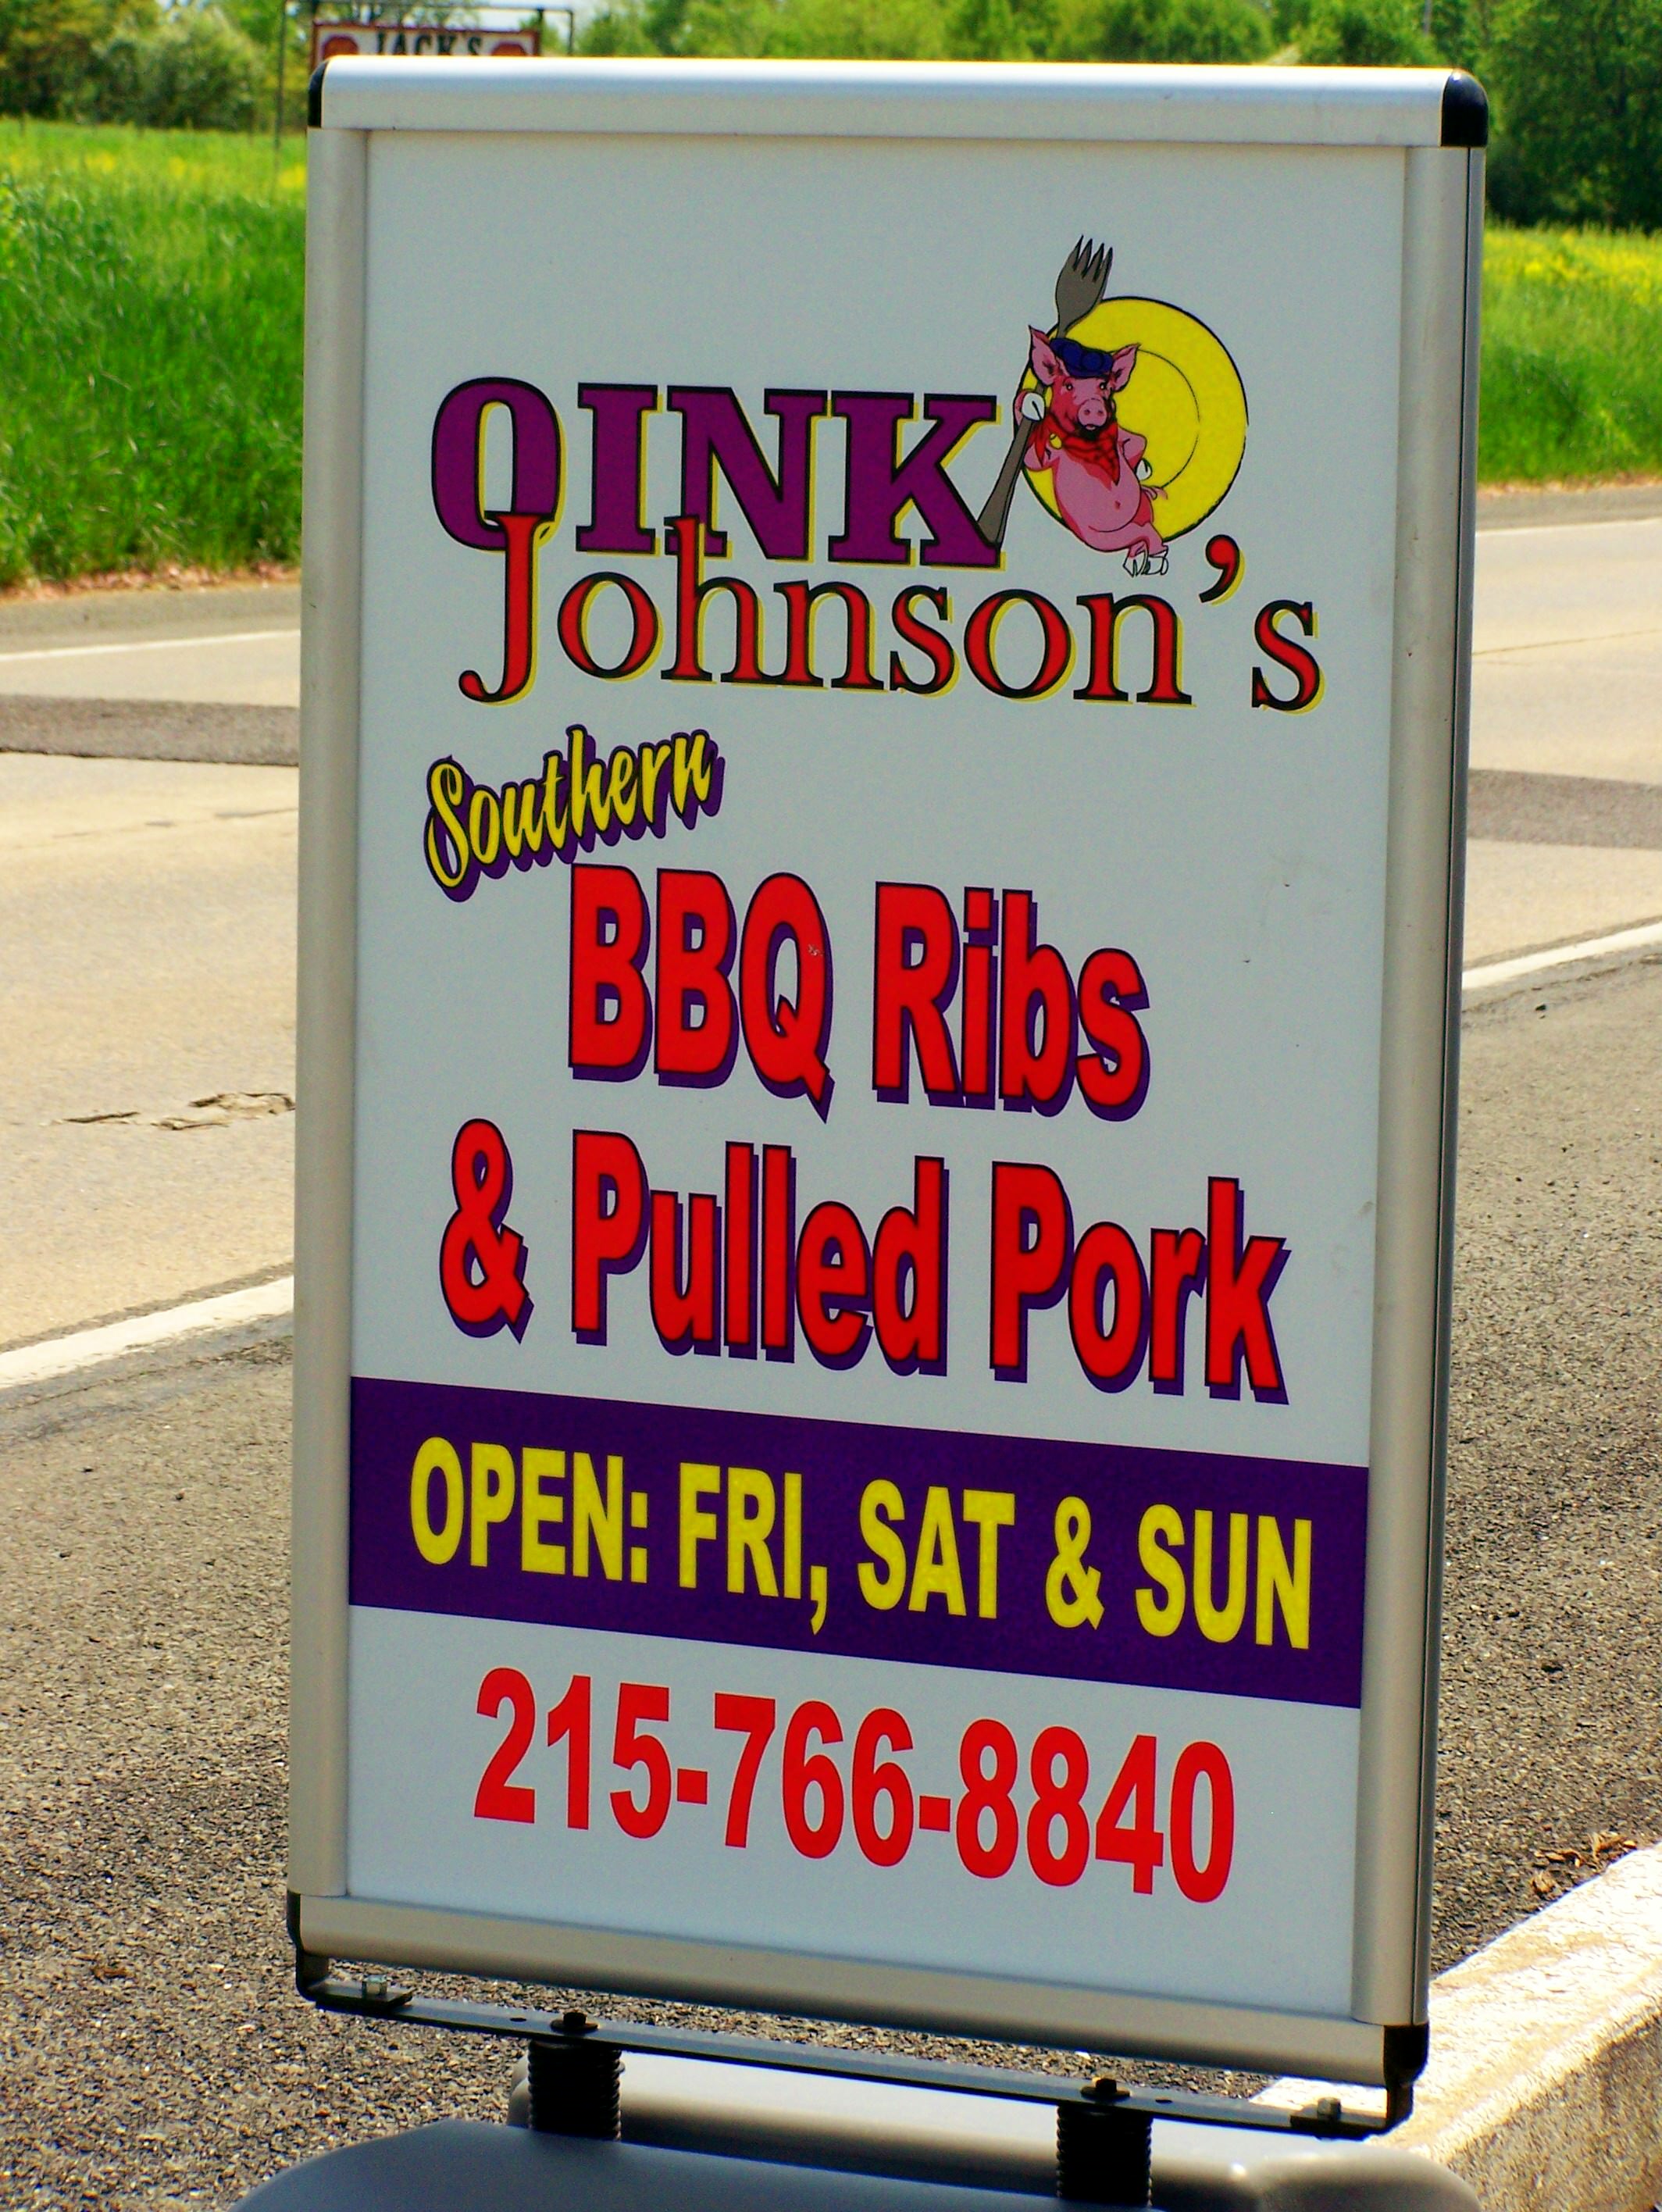 Oink Johnson’s Southern BBQ